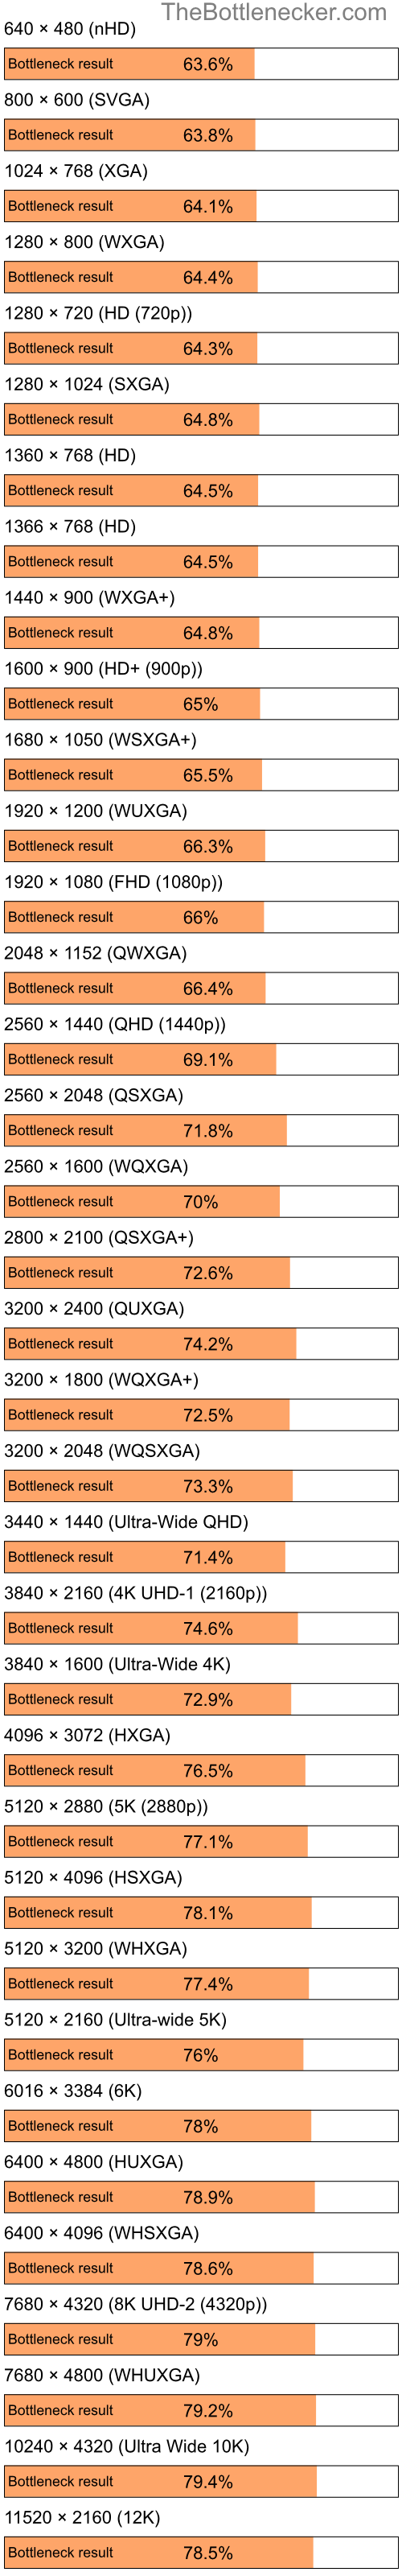 Bottleneck results by resolution for Intel Atom N280 and NVIDIA GeForce 210 in7 Days to Die